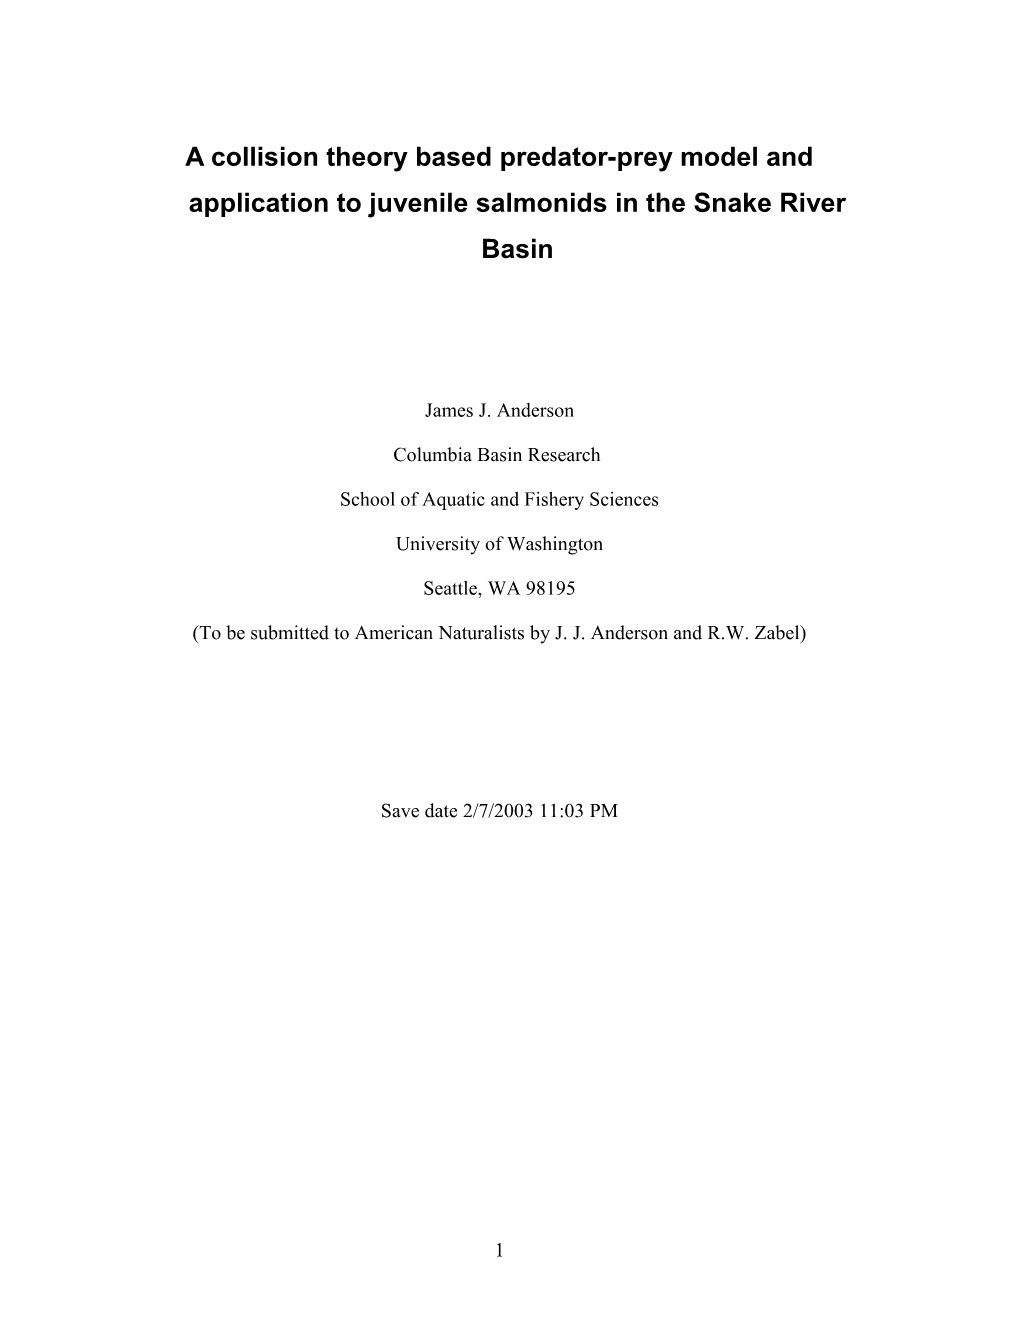 Travel Time and Distance Dependent Smolt Survival